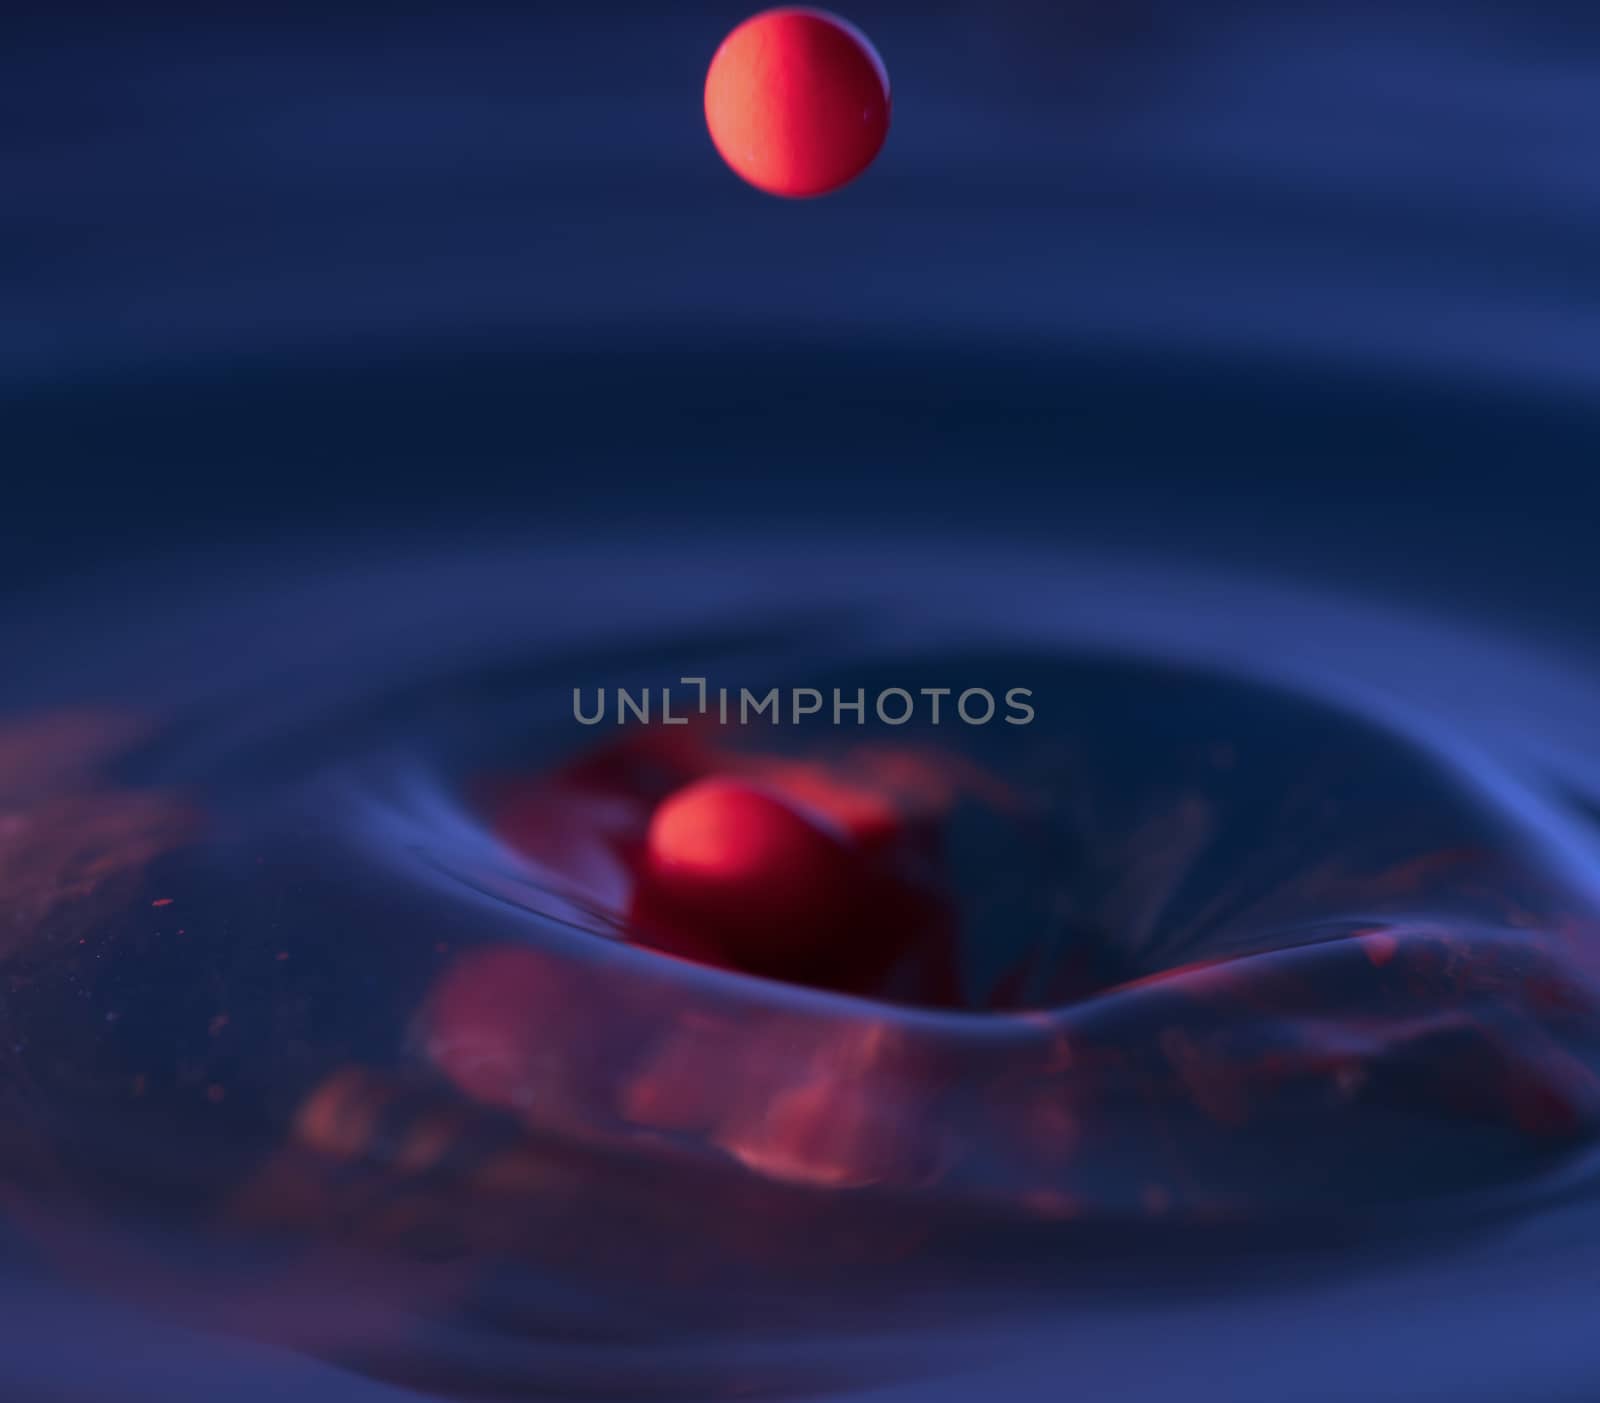 Water droplets science experiment and art concept bright color b by noppha80